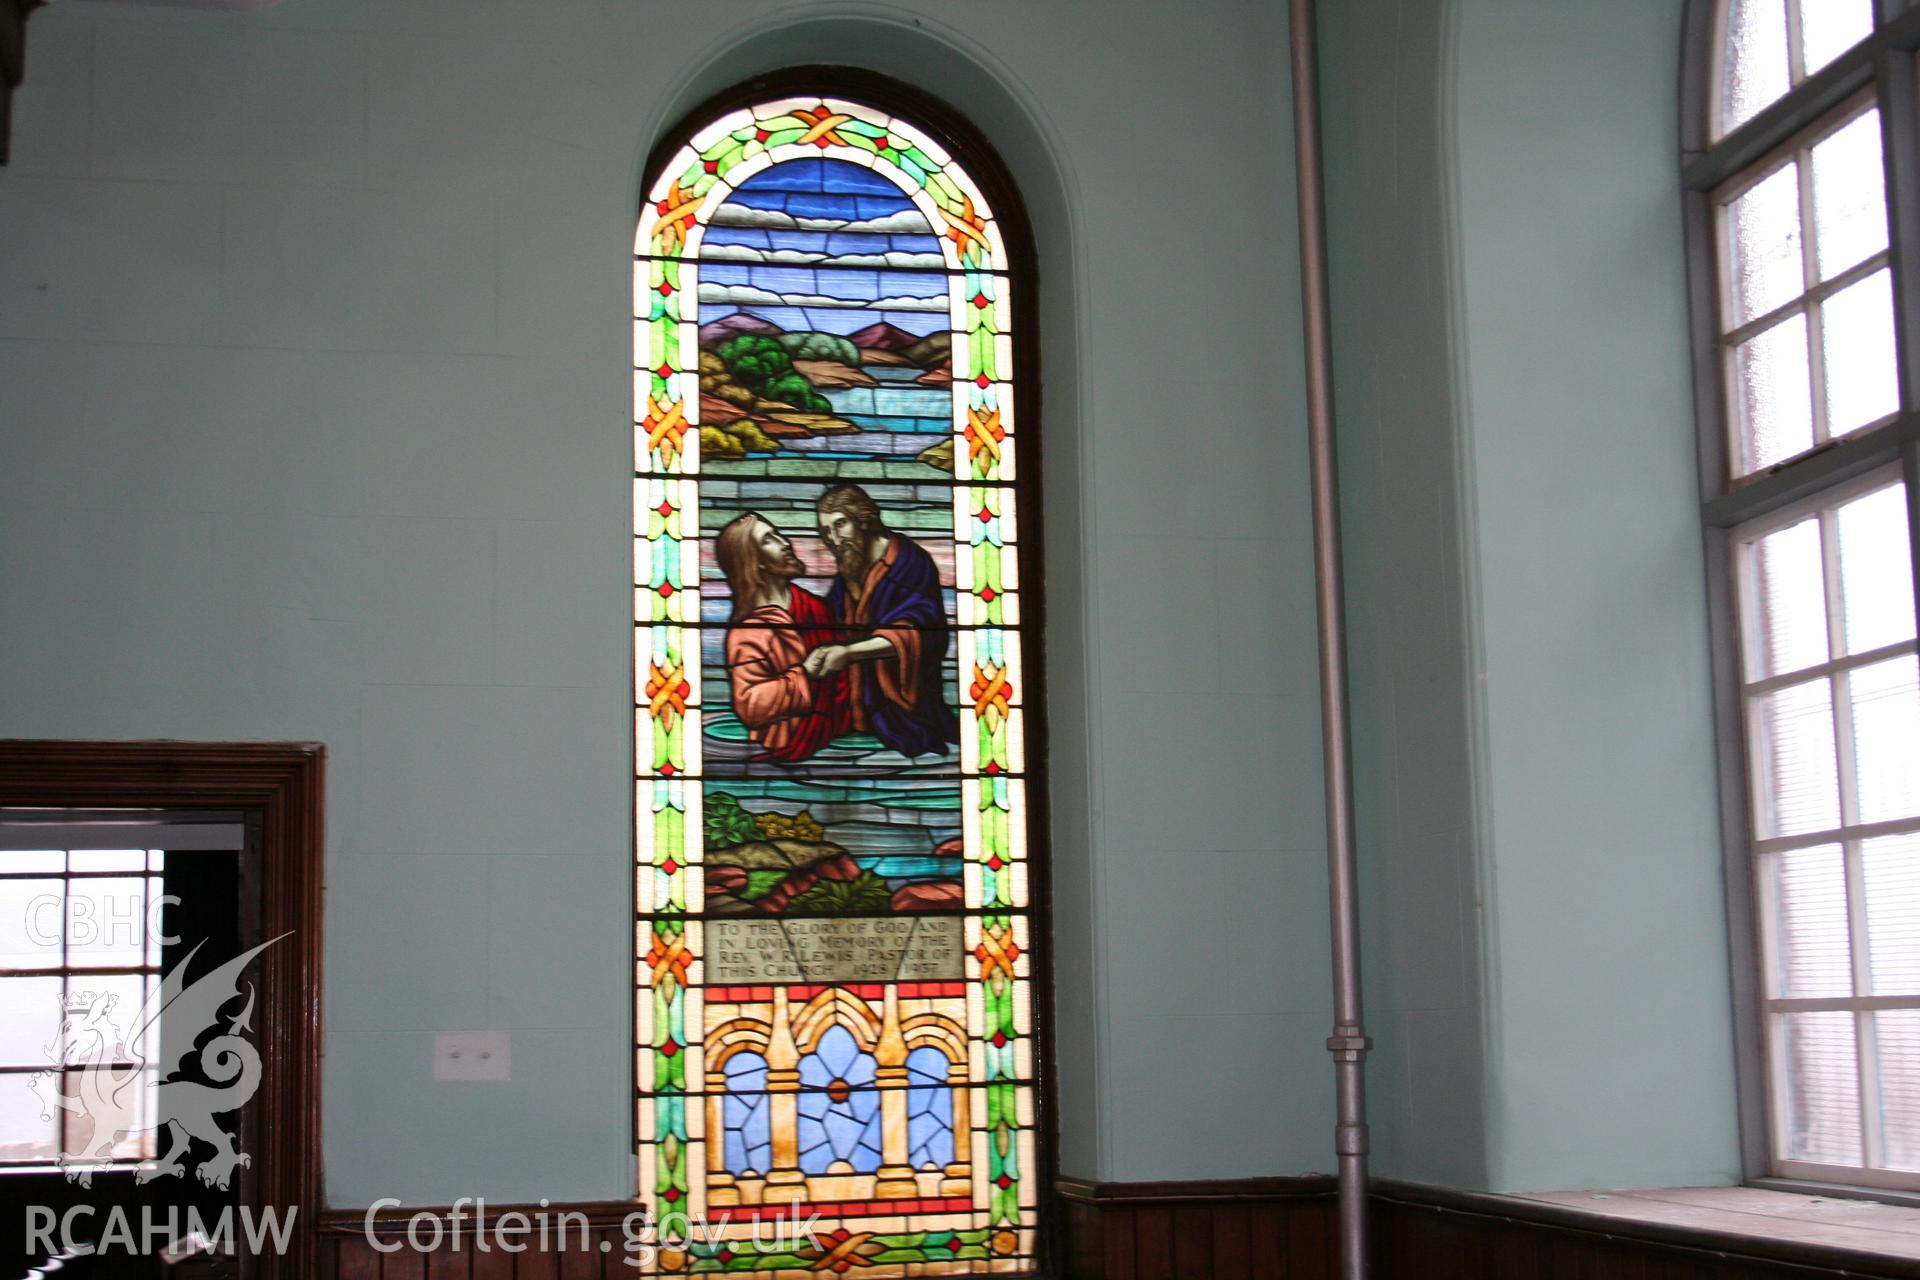 Hanbury Road baptist chapel, Bargoed, digital colour photograph showing interior - memorial window, received in the course of Emergency Recording case ref no RCS2/1/2247.